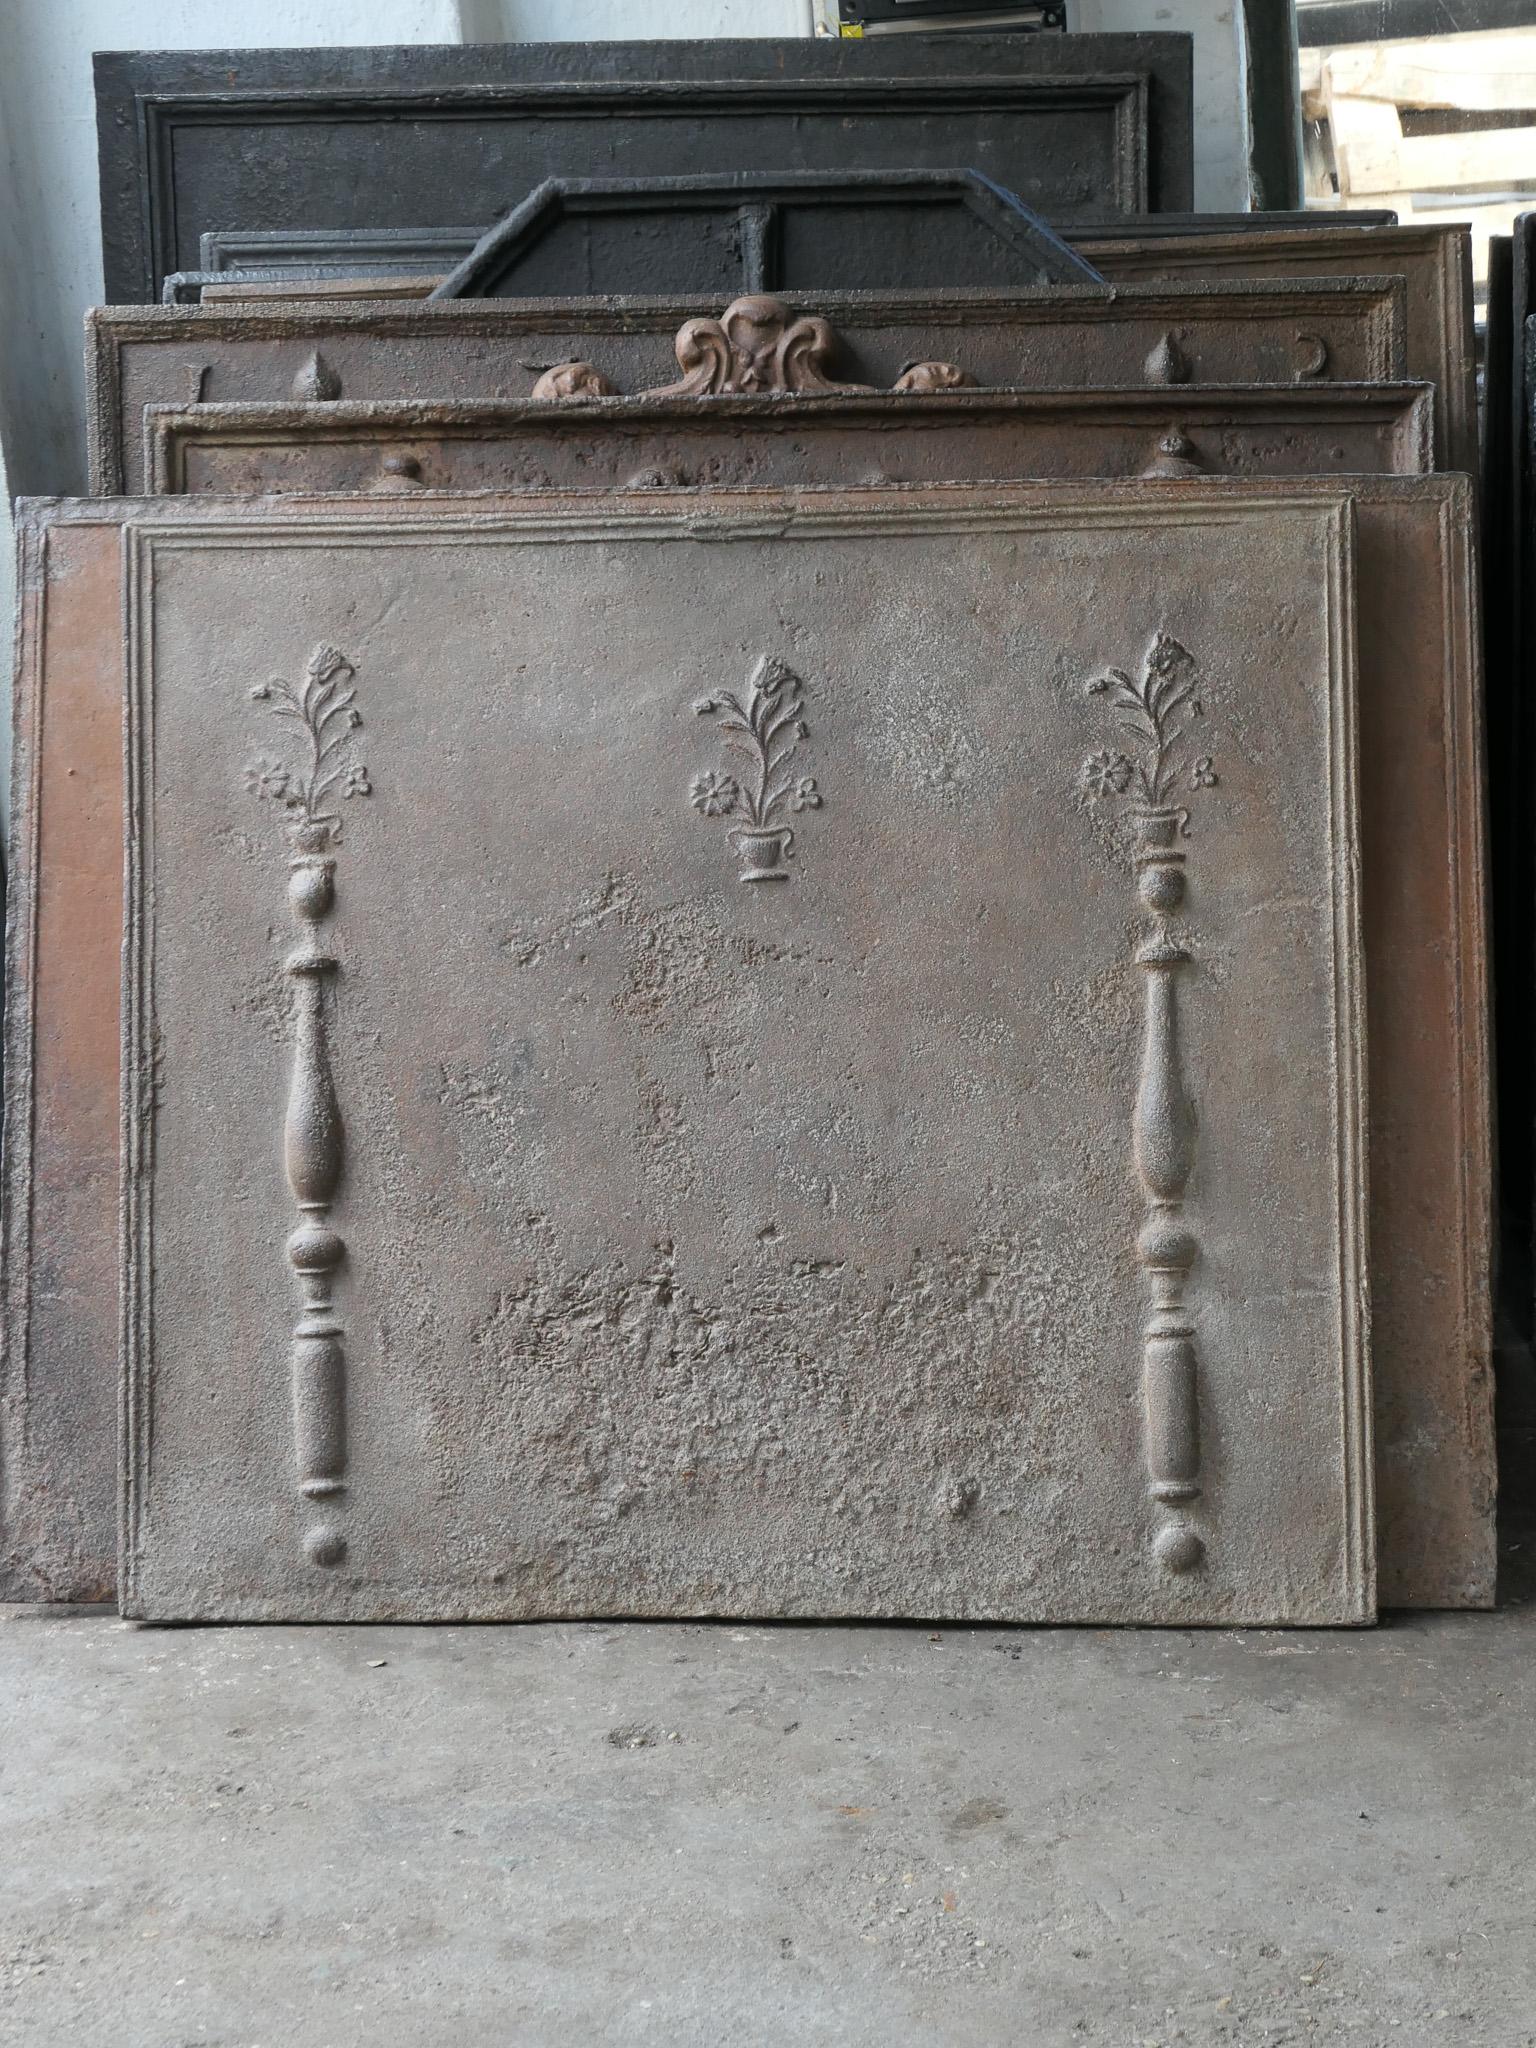 Beautiful 18th century French Louis XV fireback with flower baskets and two pillars. The pillars refer to the club of Hercules and Stand for strength and the unknown. Towards the end of the 18th century and the start of the Louis XV style, the